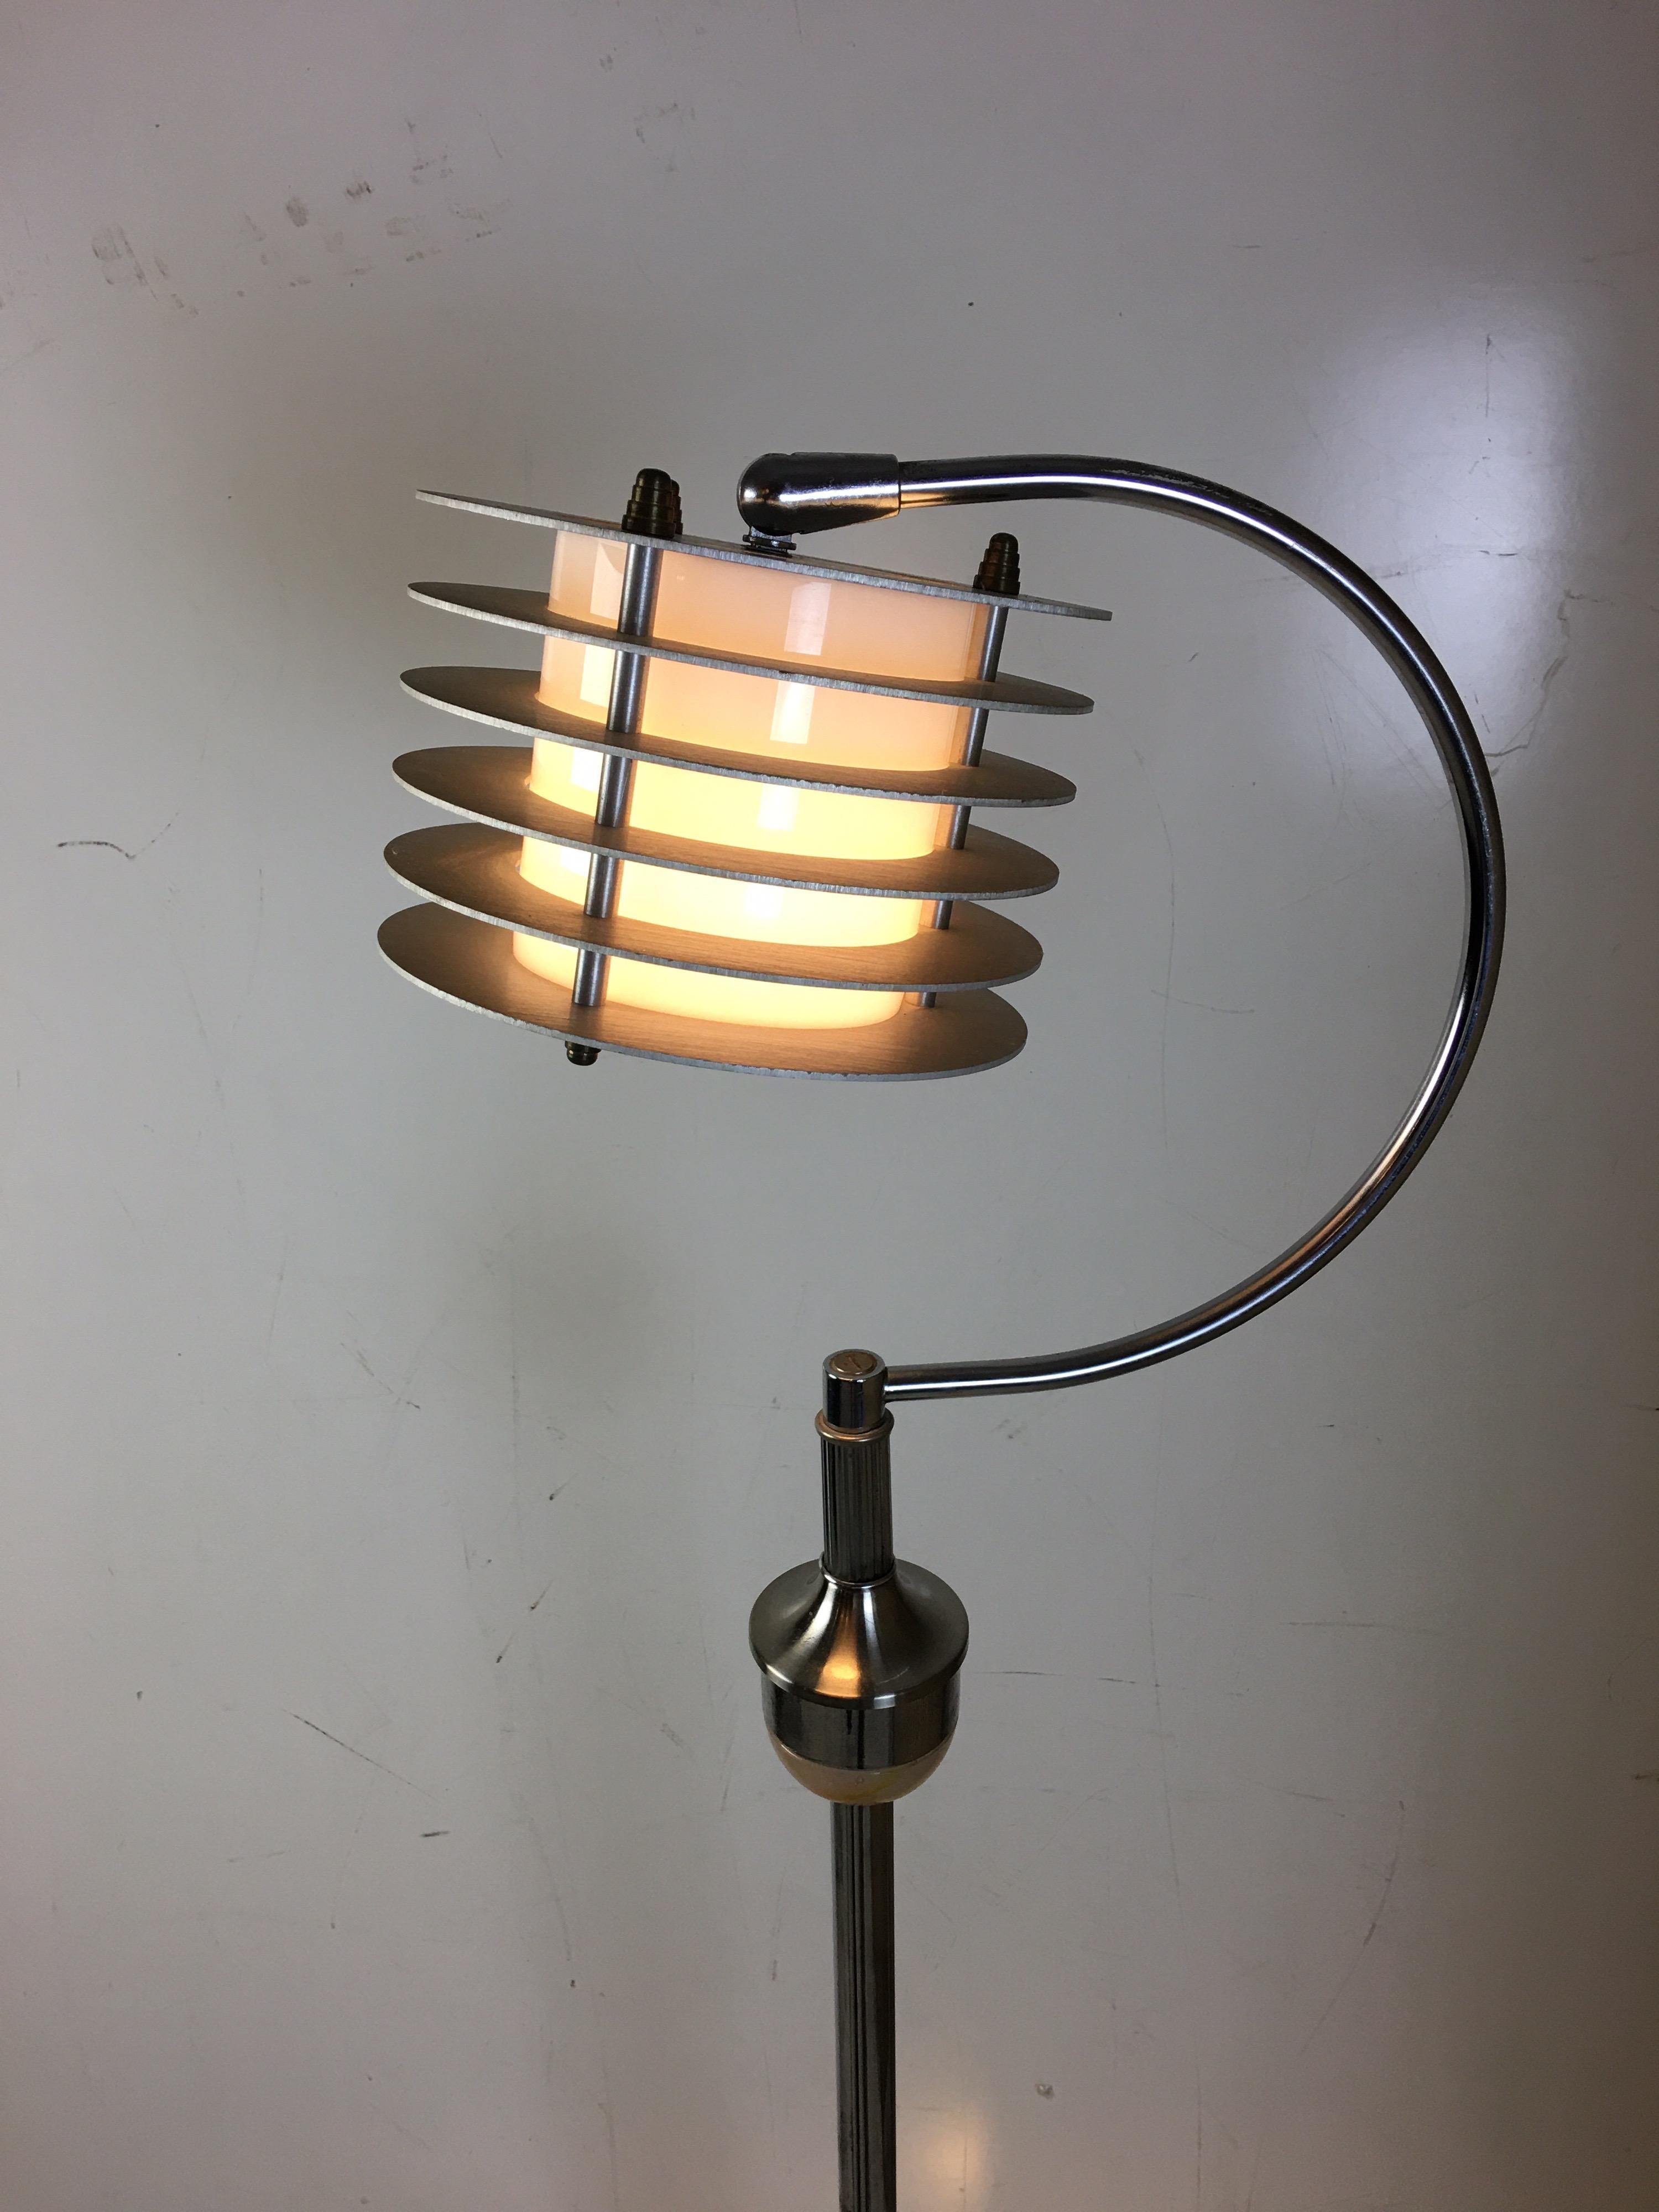 ABCO Art Deco chrome floor lamp with Light-up base. Swirled multicolored glass at bottom has it's own light source that gives this deco lamp a great twist. Lampshade moves and adjusts to point the light in many directions. Appears chrome was